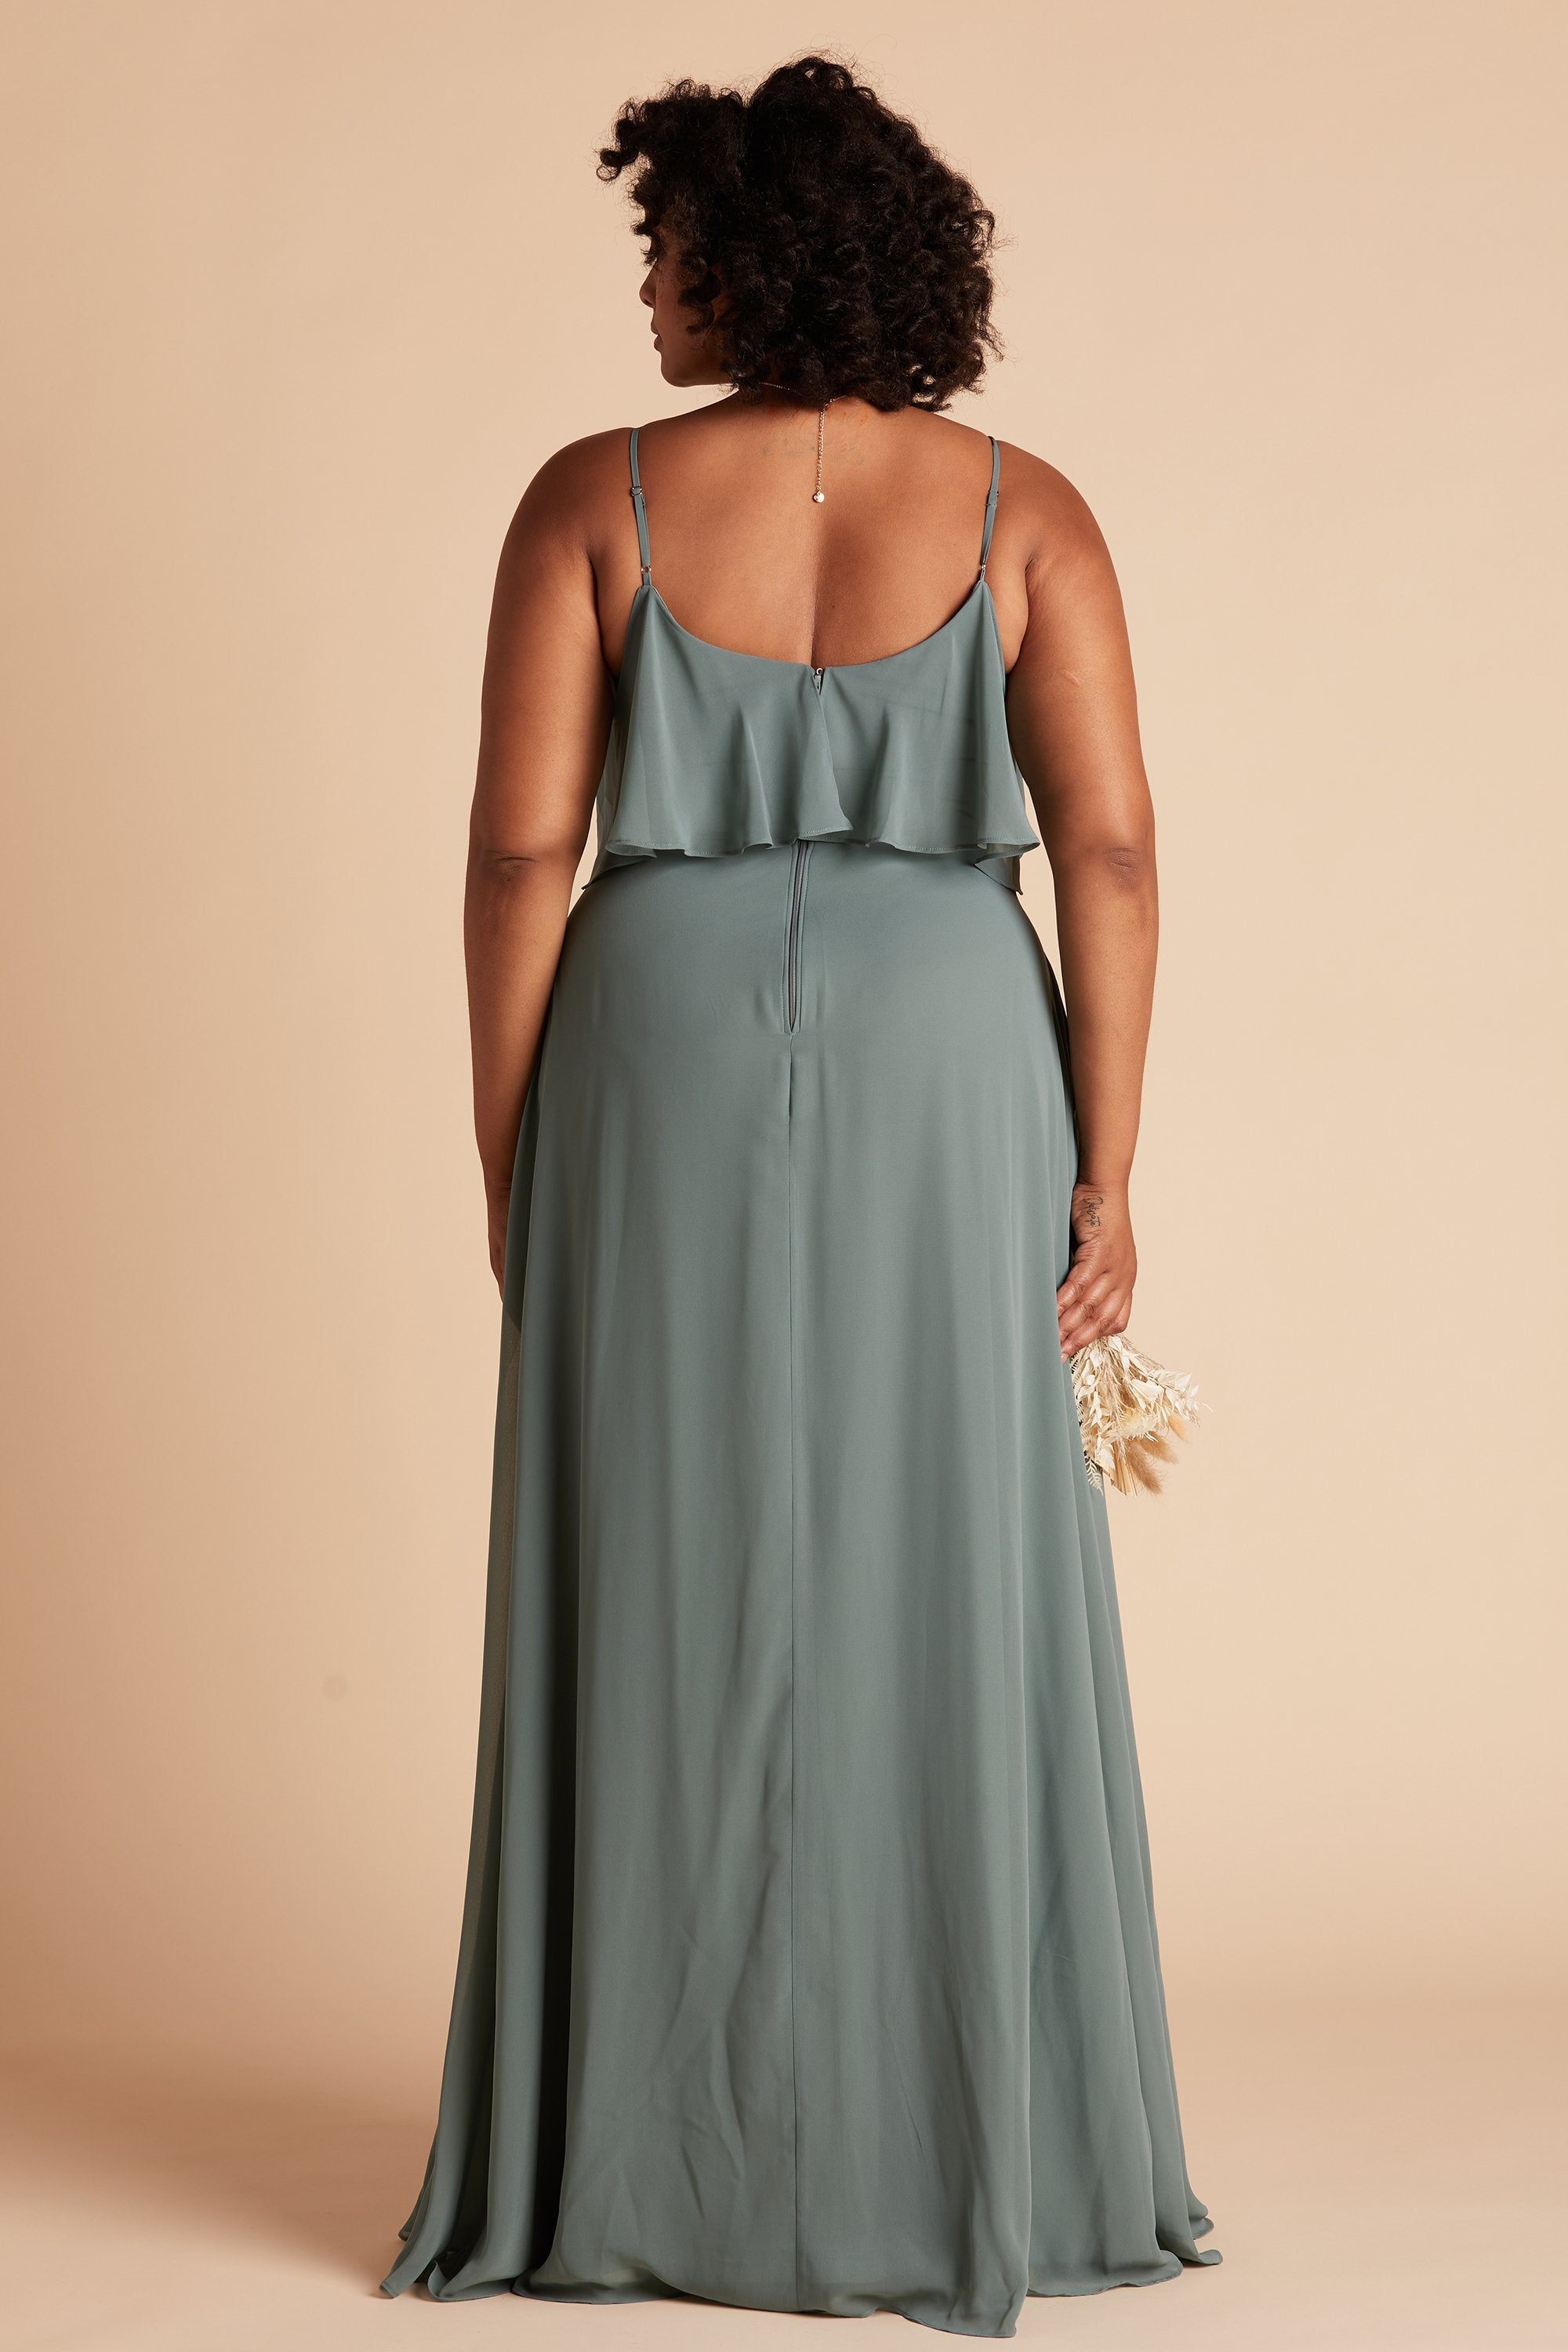 Jane convertible plus size bridesmaid dress in sea glass green chiffon by Birdy Grey, back view